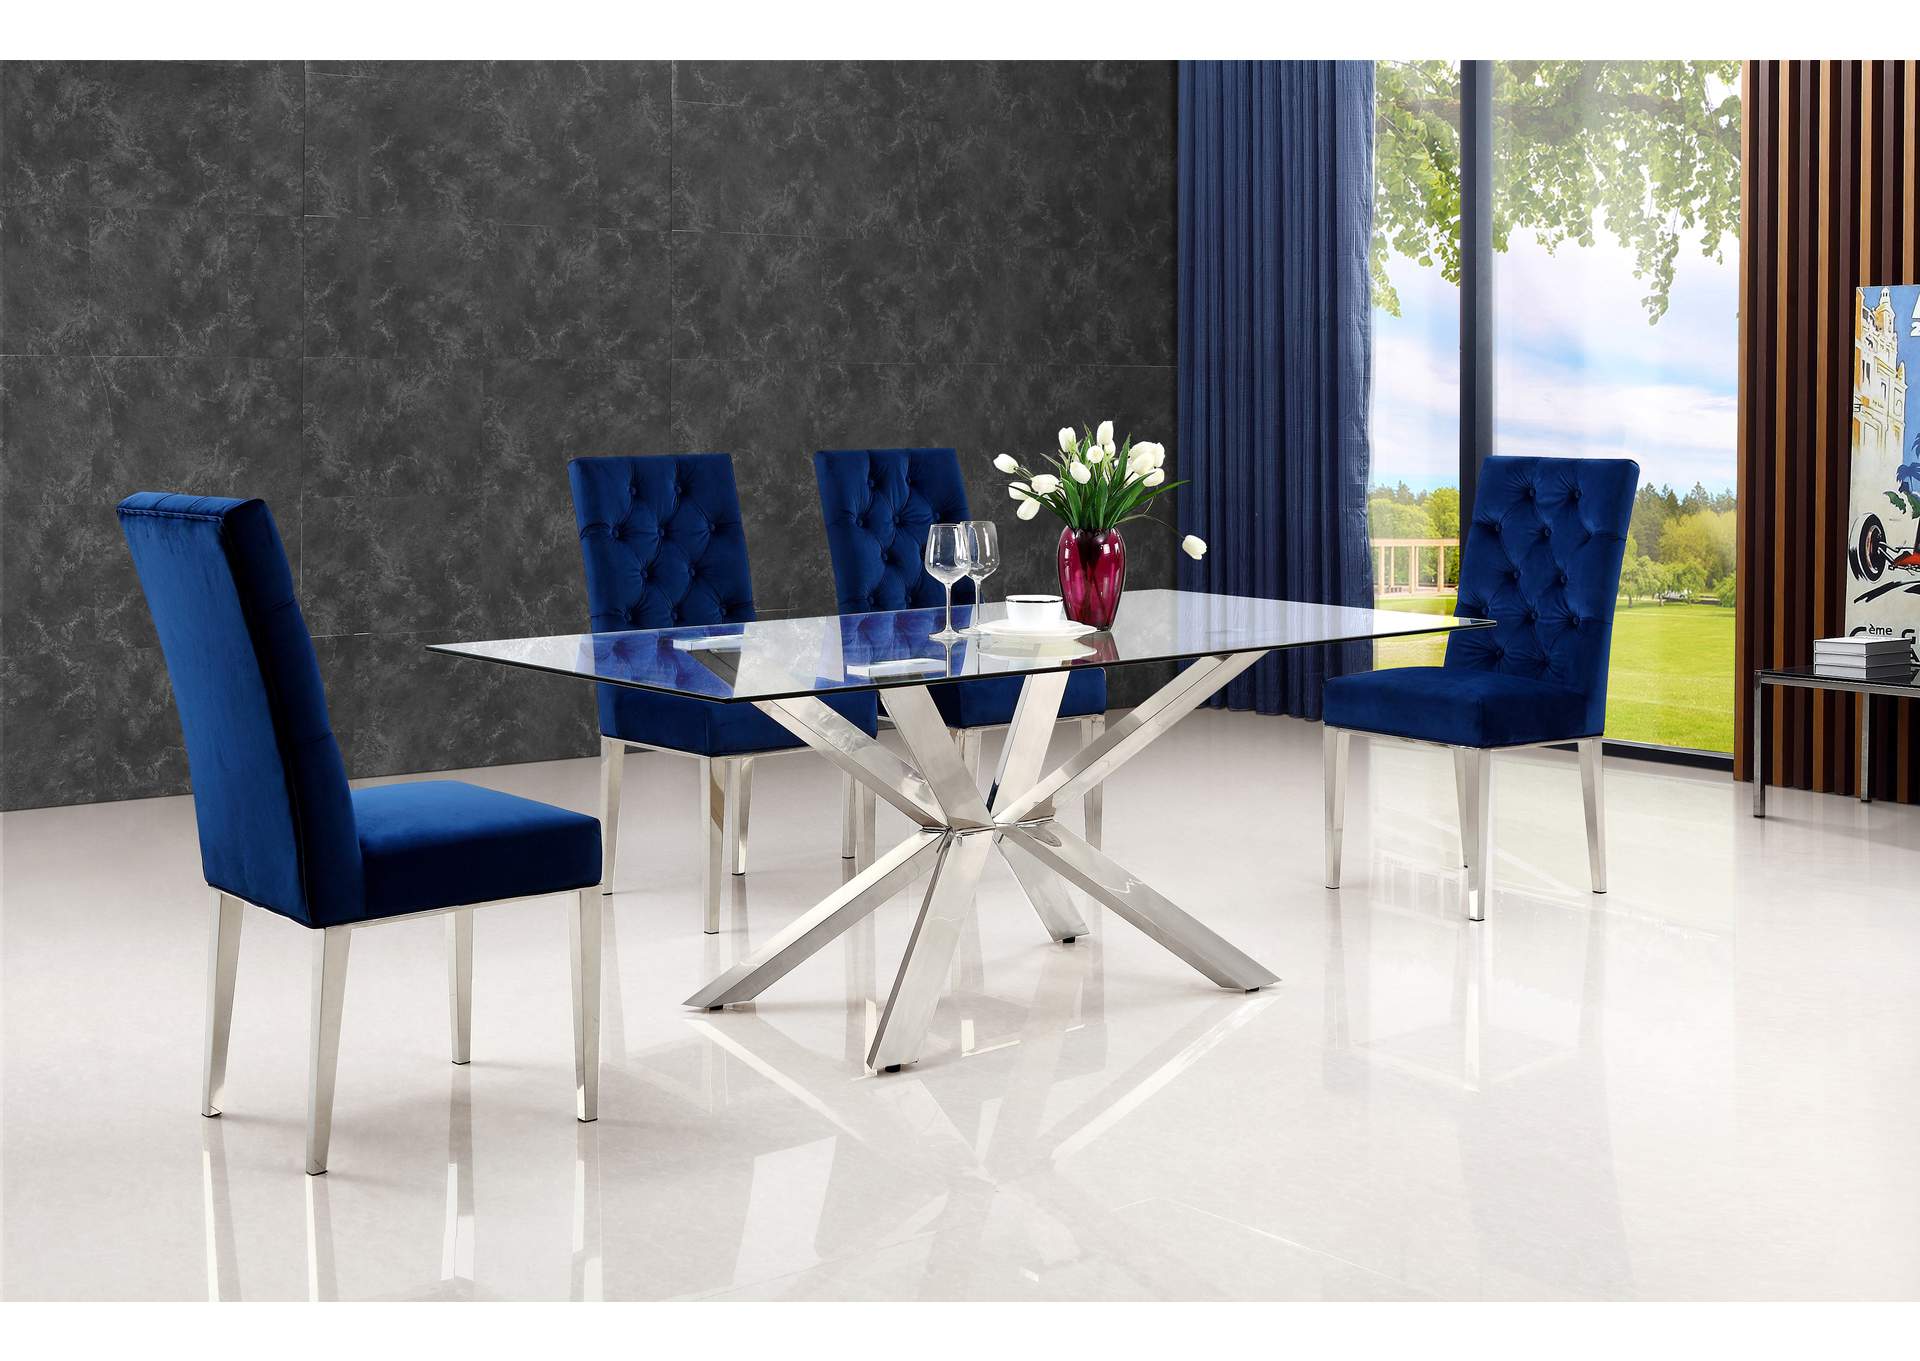 Juno Chrome Dining Table W 4 Navy Chair, Navy Blue Dining Table And Chairs